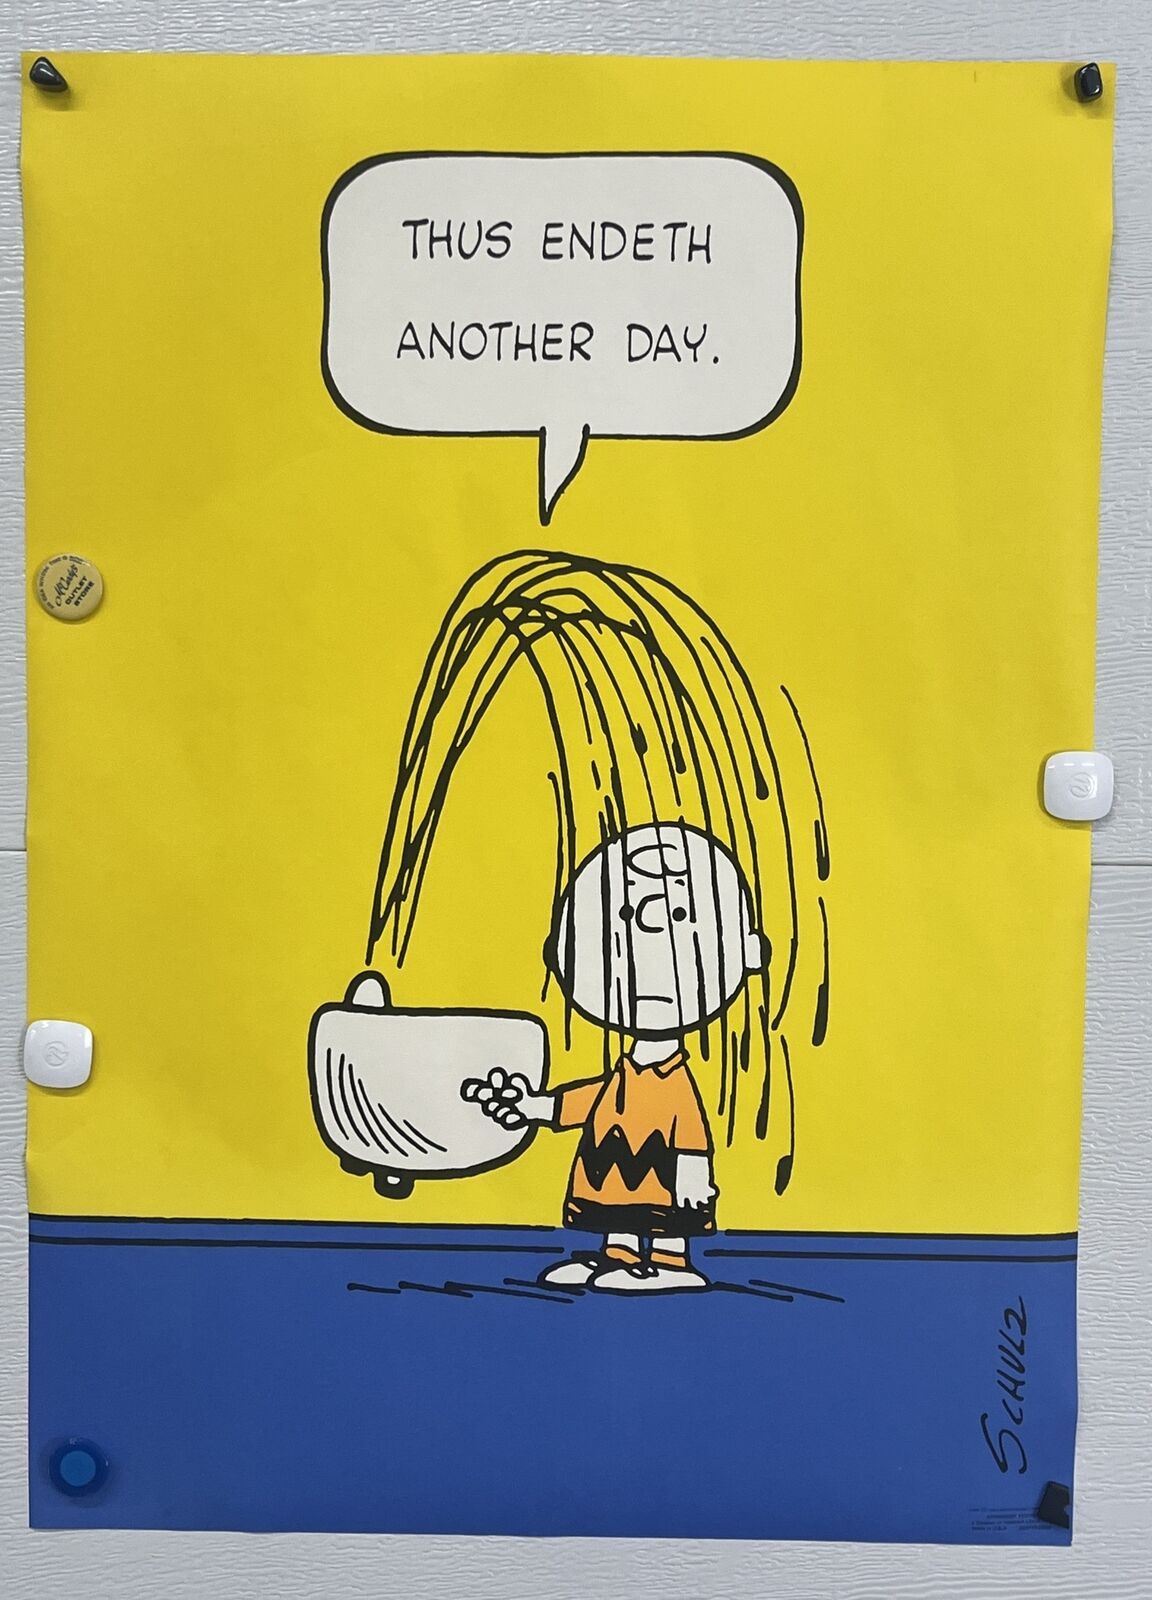 RARE VINTAGE 1958 PEANUTS CHARLIE BROWN CHARLES SCHULTZ LITHOGRAPH PRINT POSTER